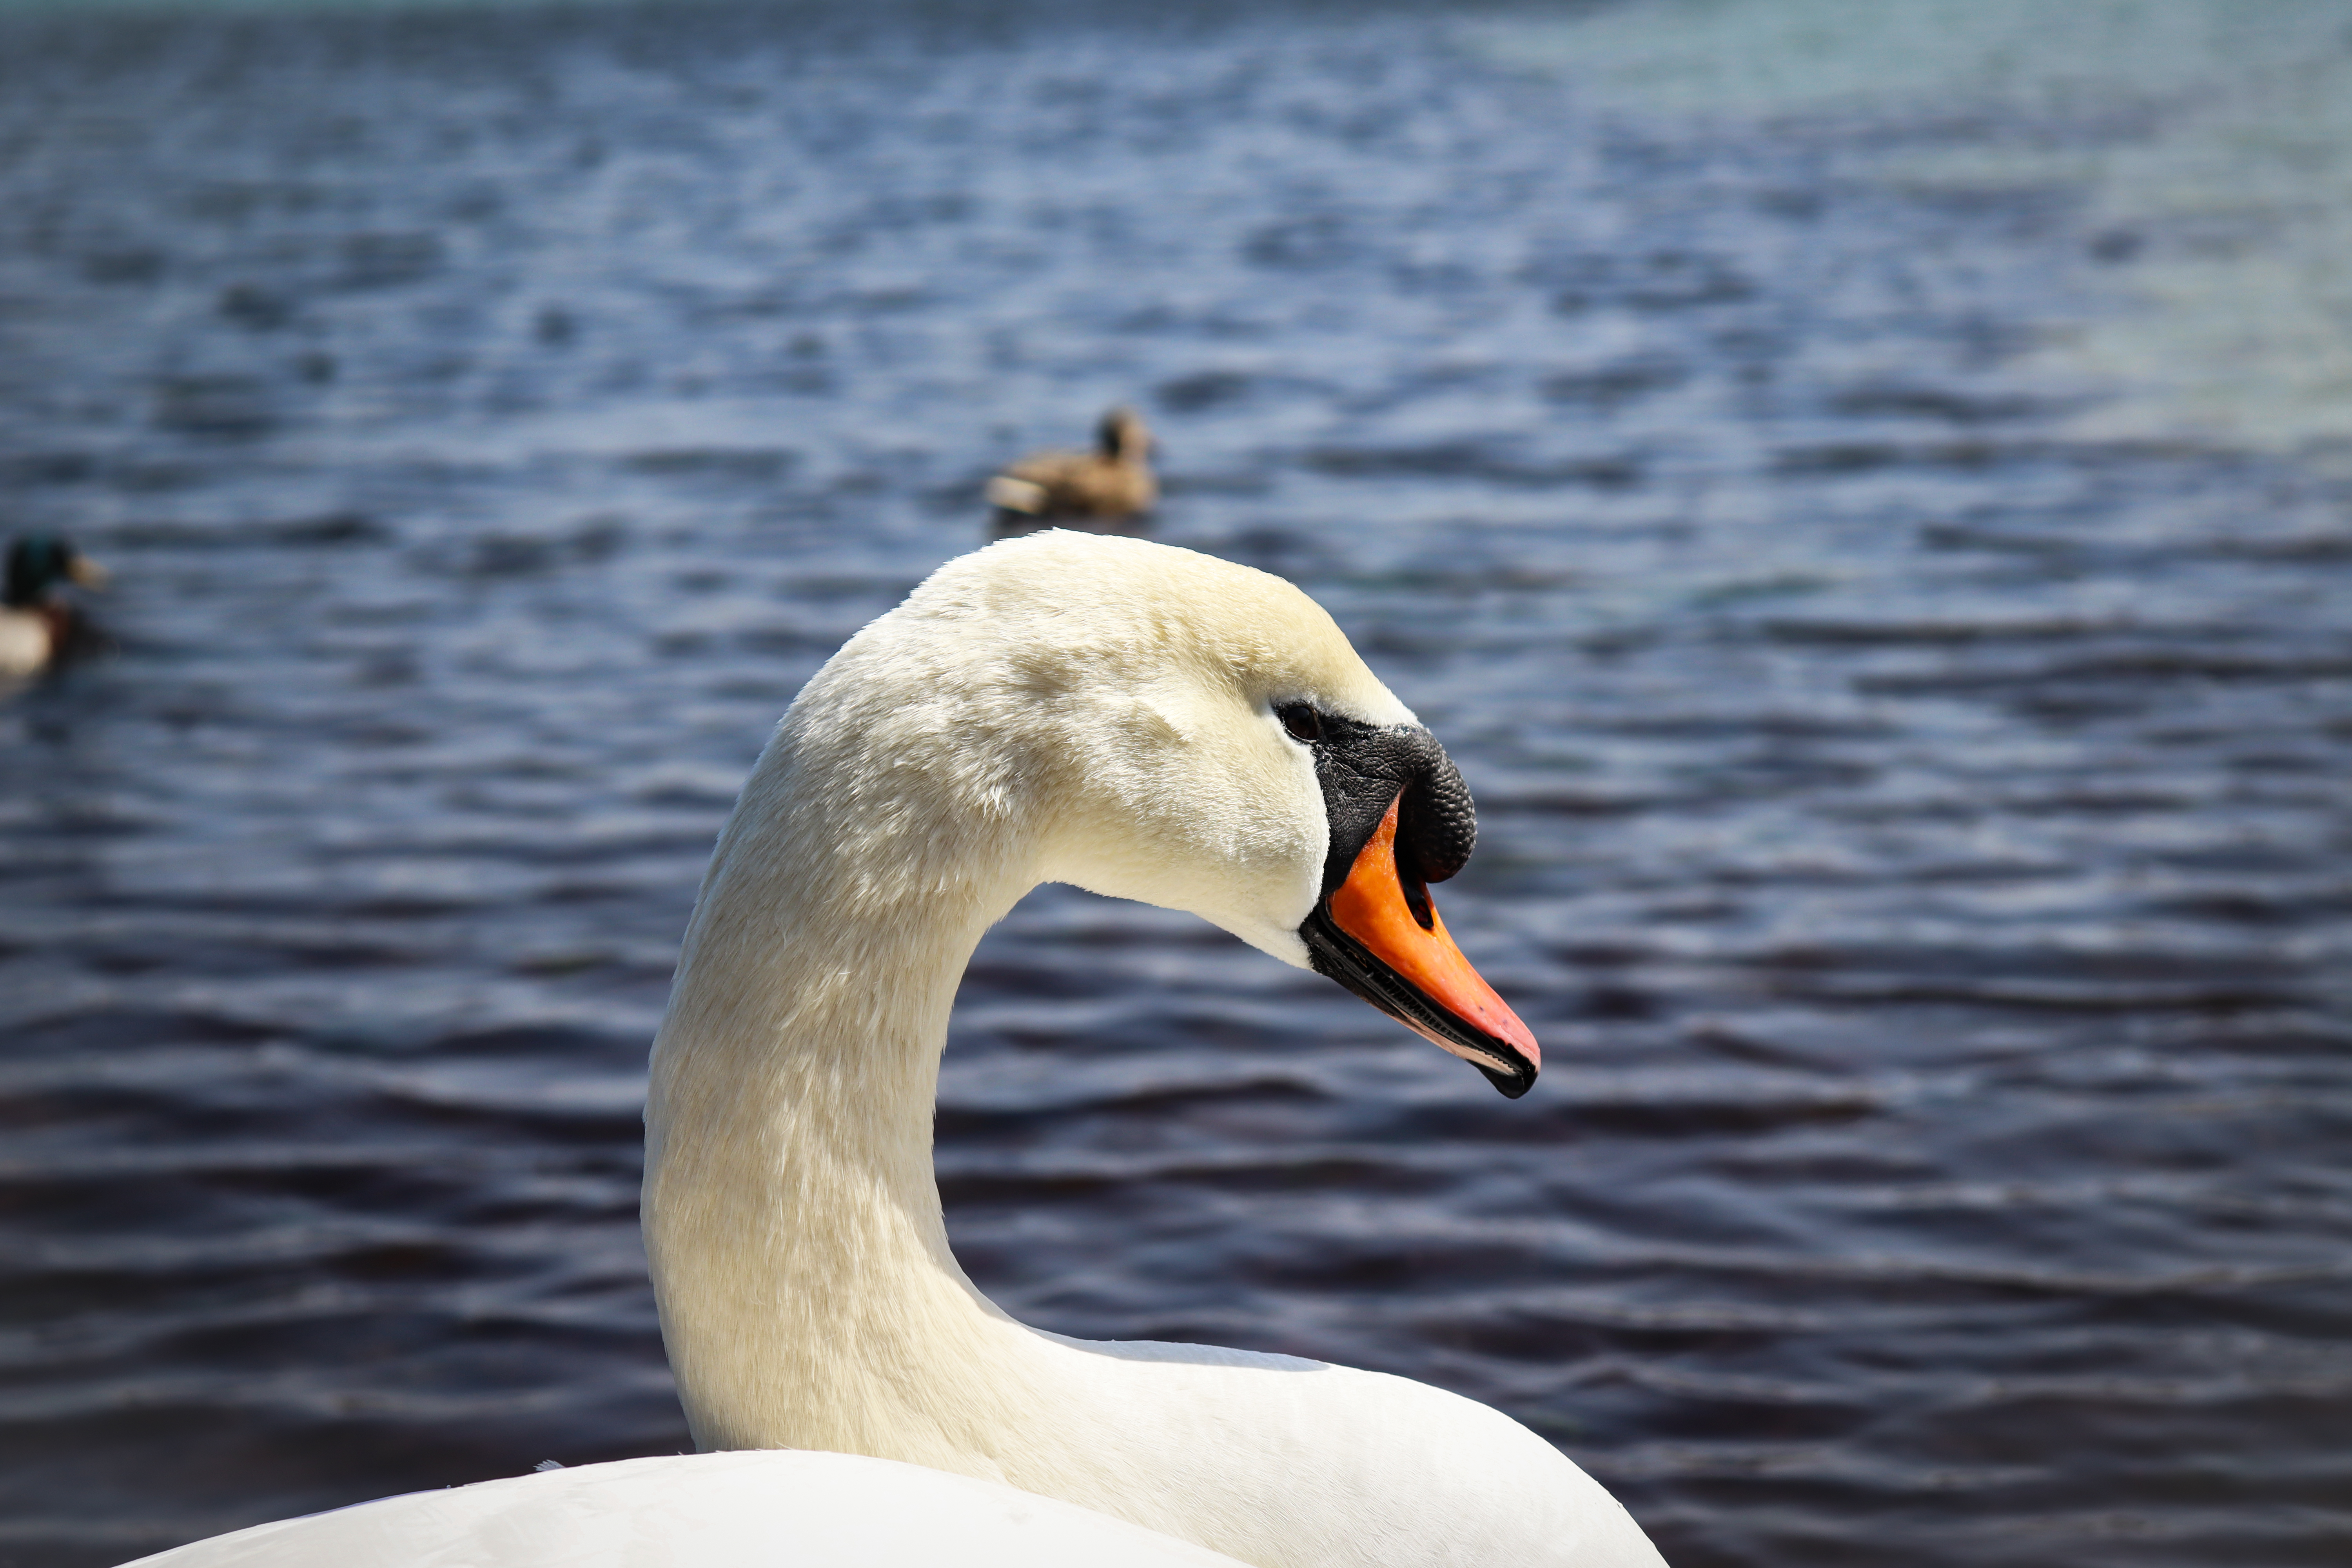 A beautiful swan on the water